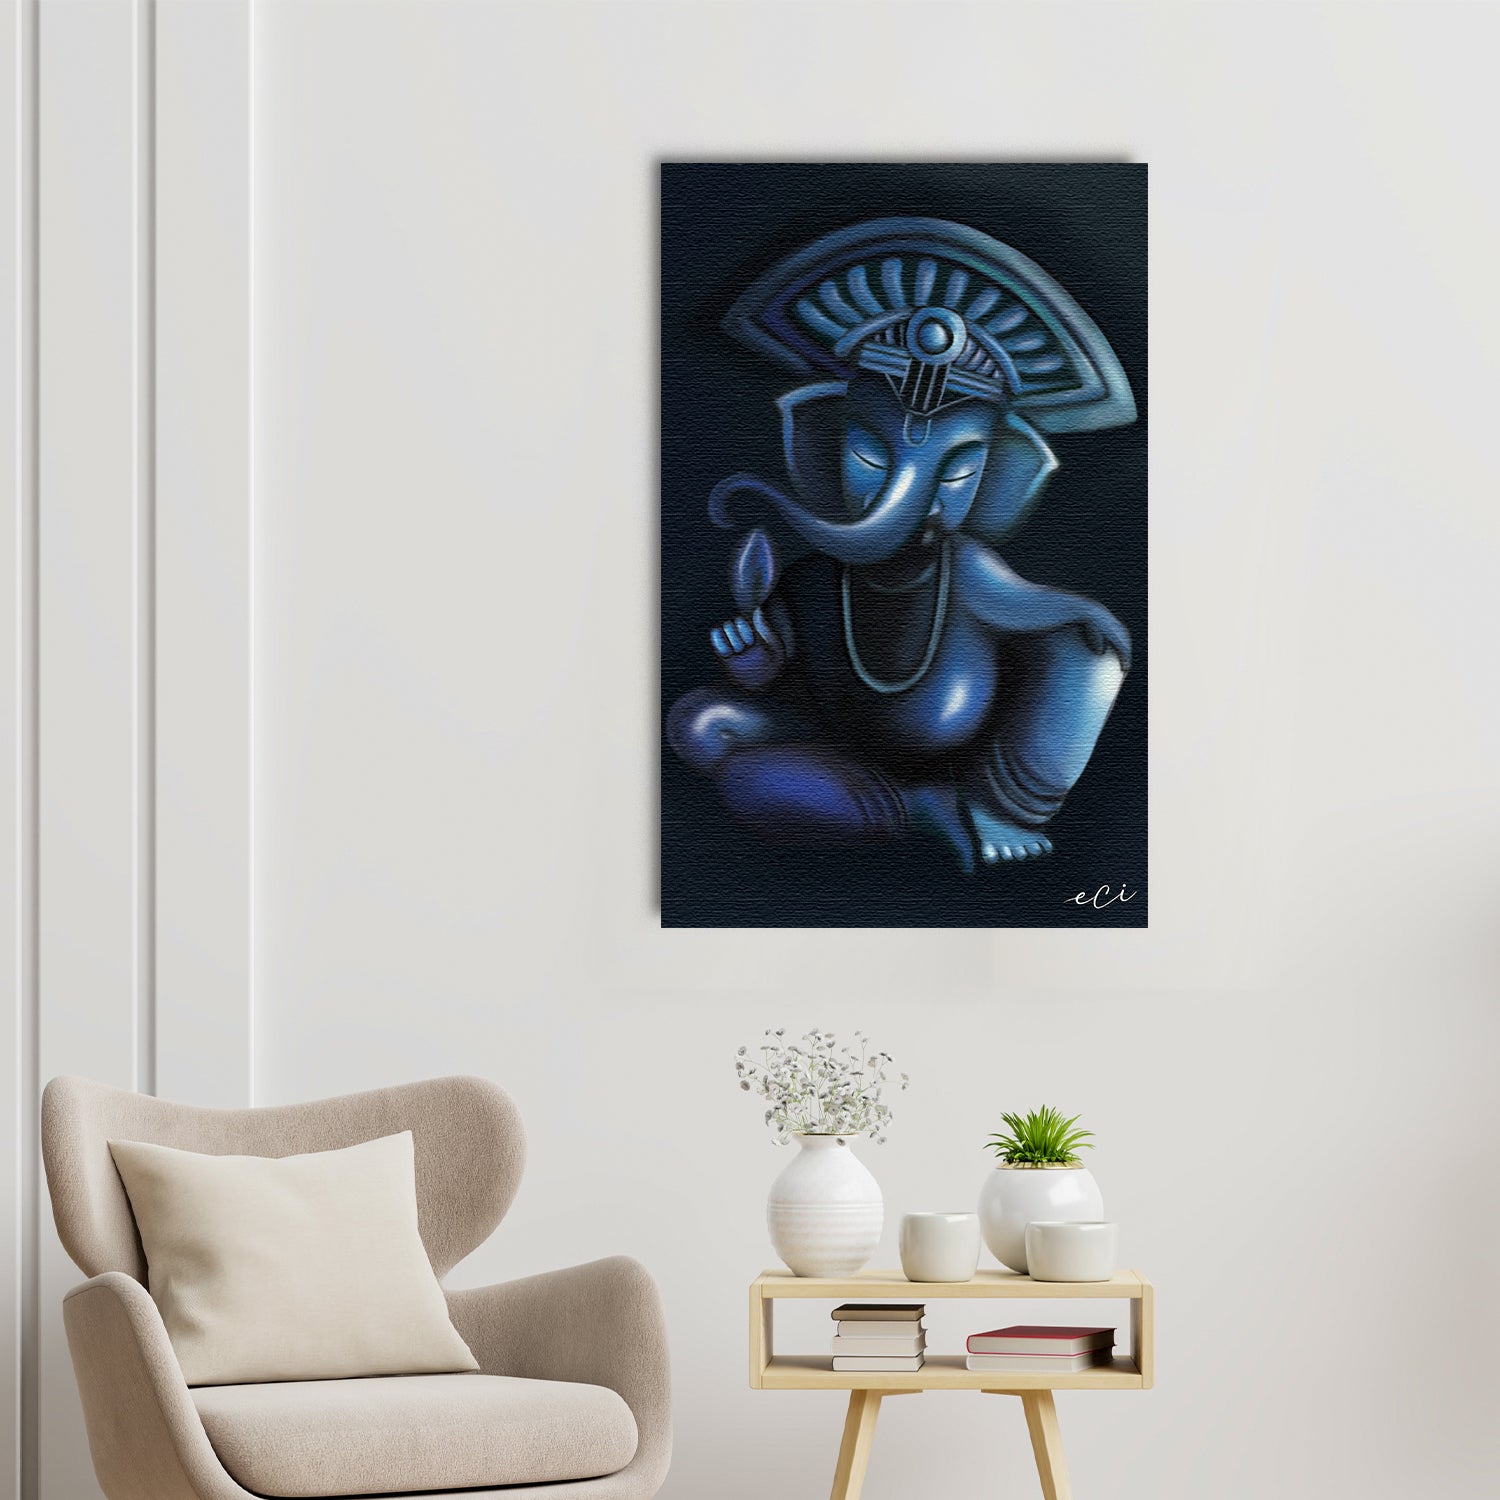 Calm and Relaxing Lord Ganesha Original Design Canvas Printed Wall Painting 1